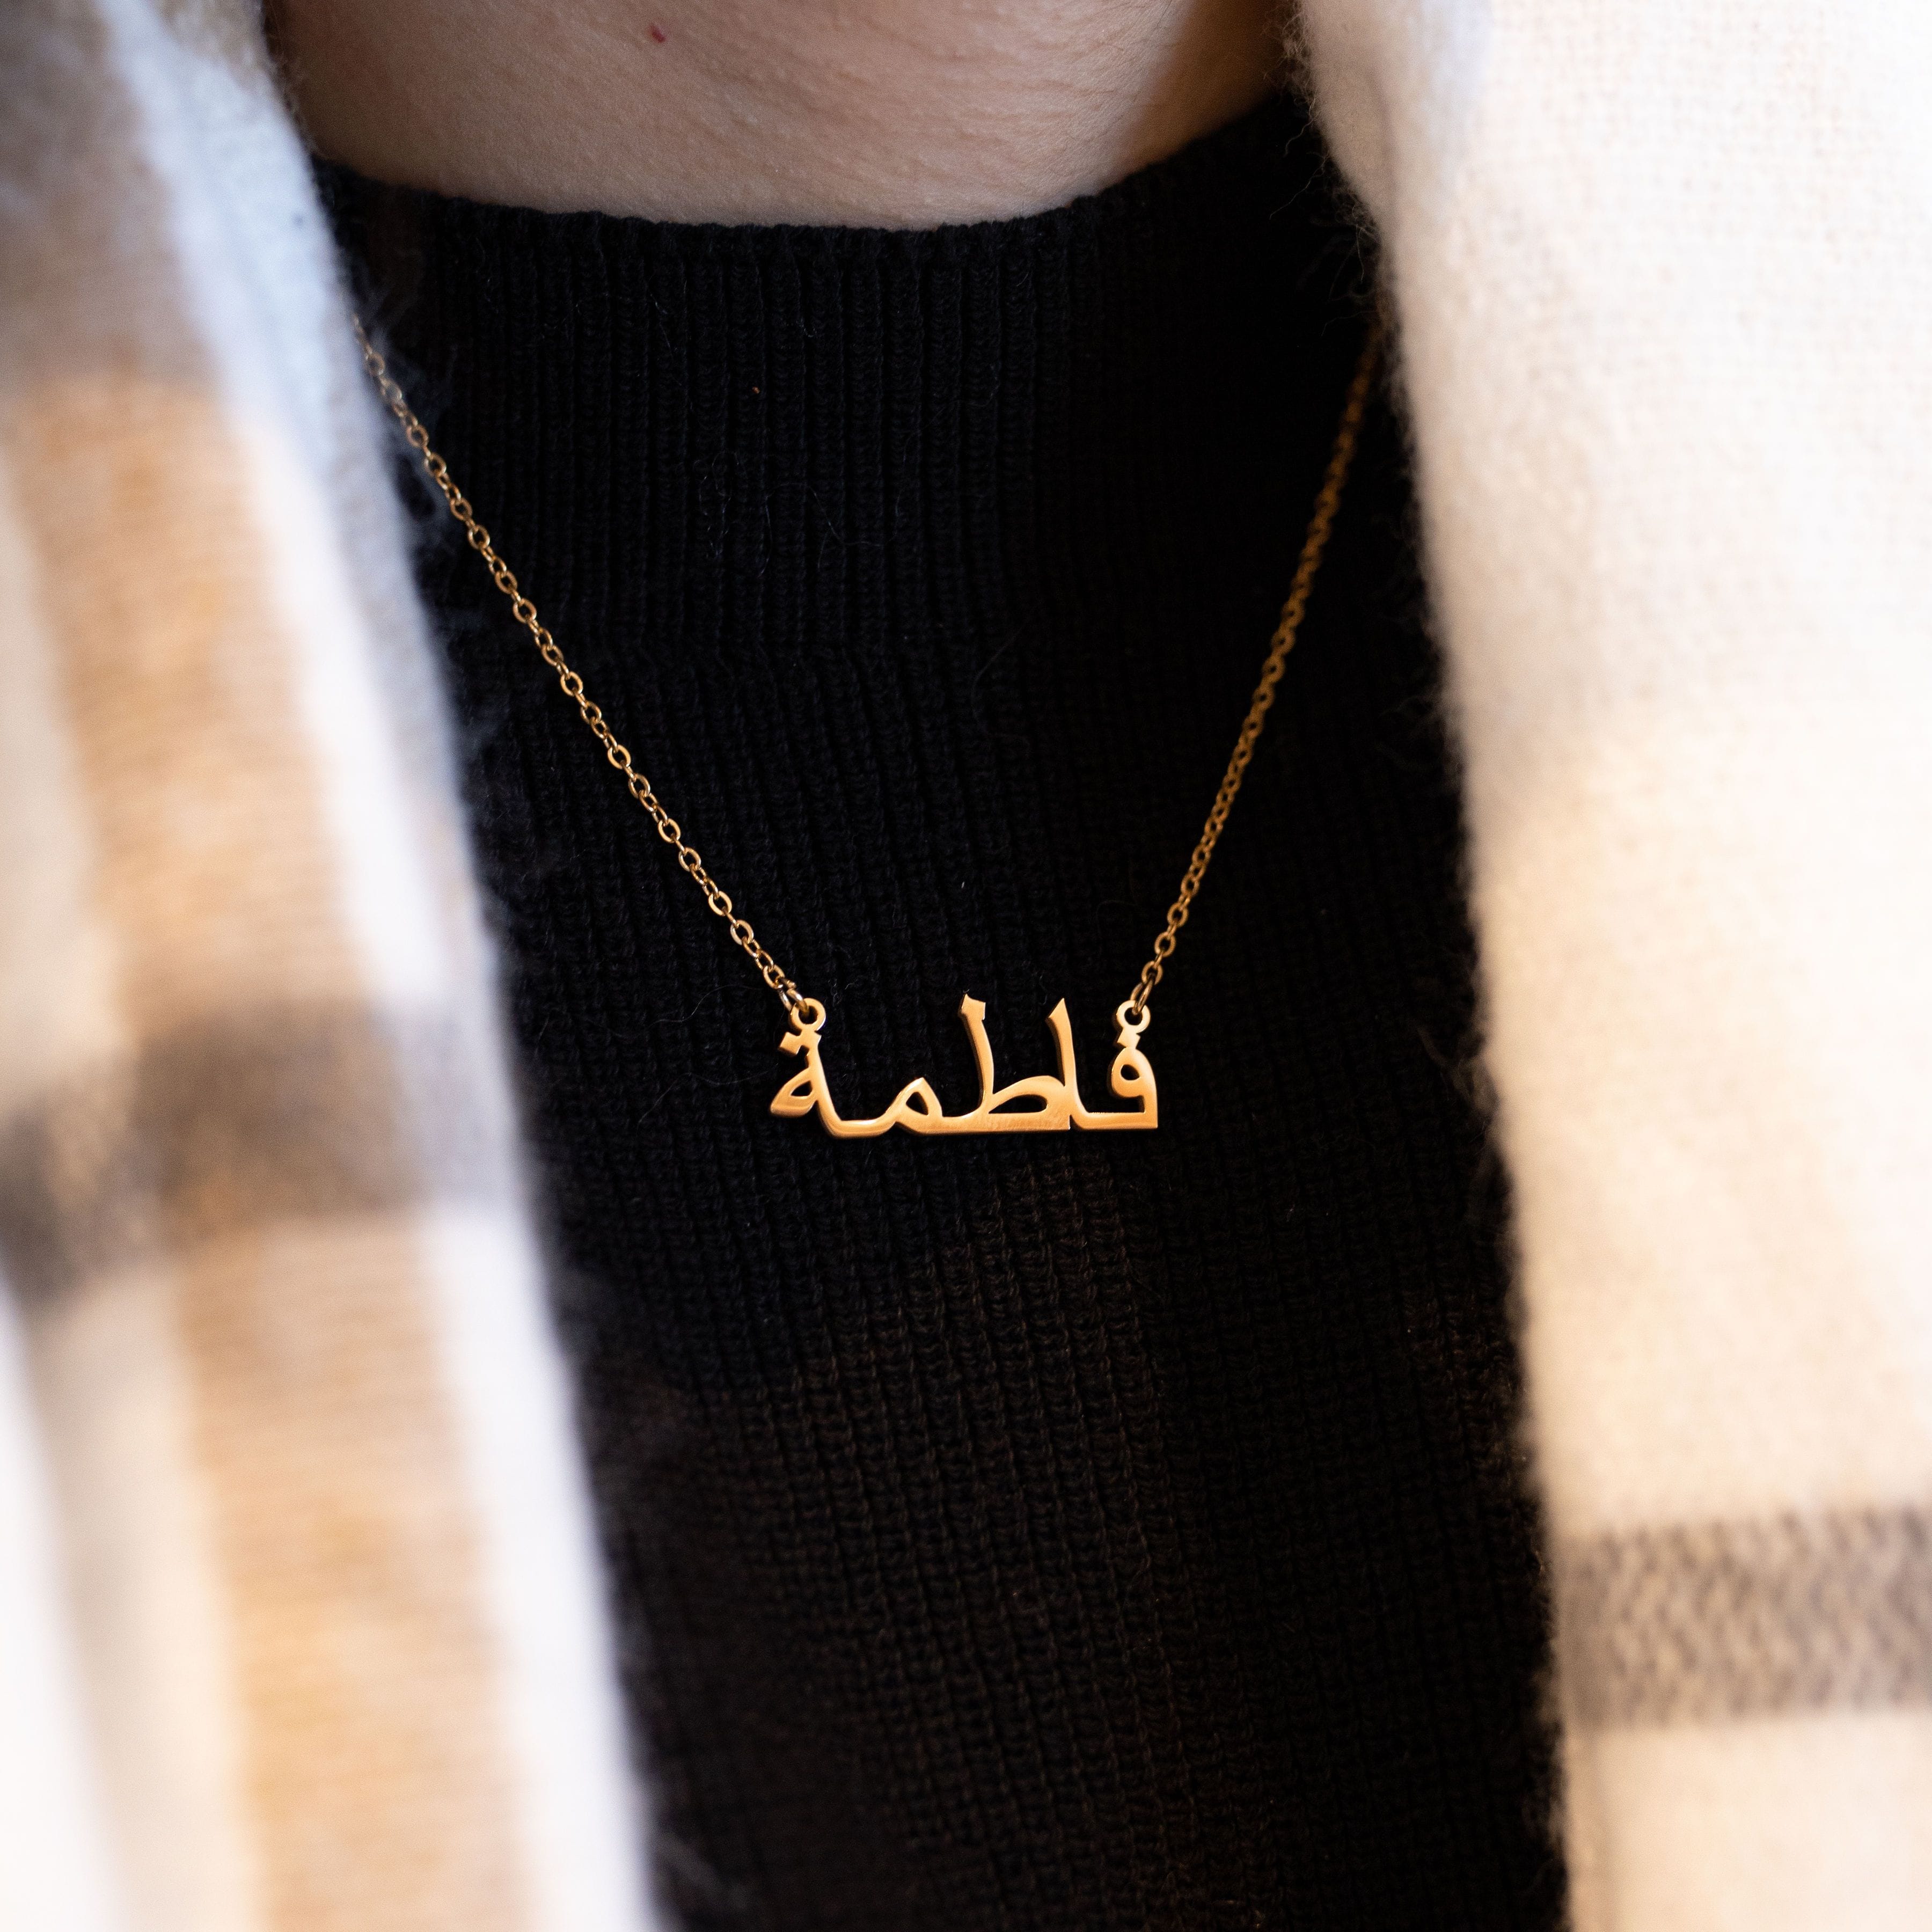 Ready Name Necklace | Letters A-M - Nominal